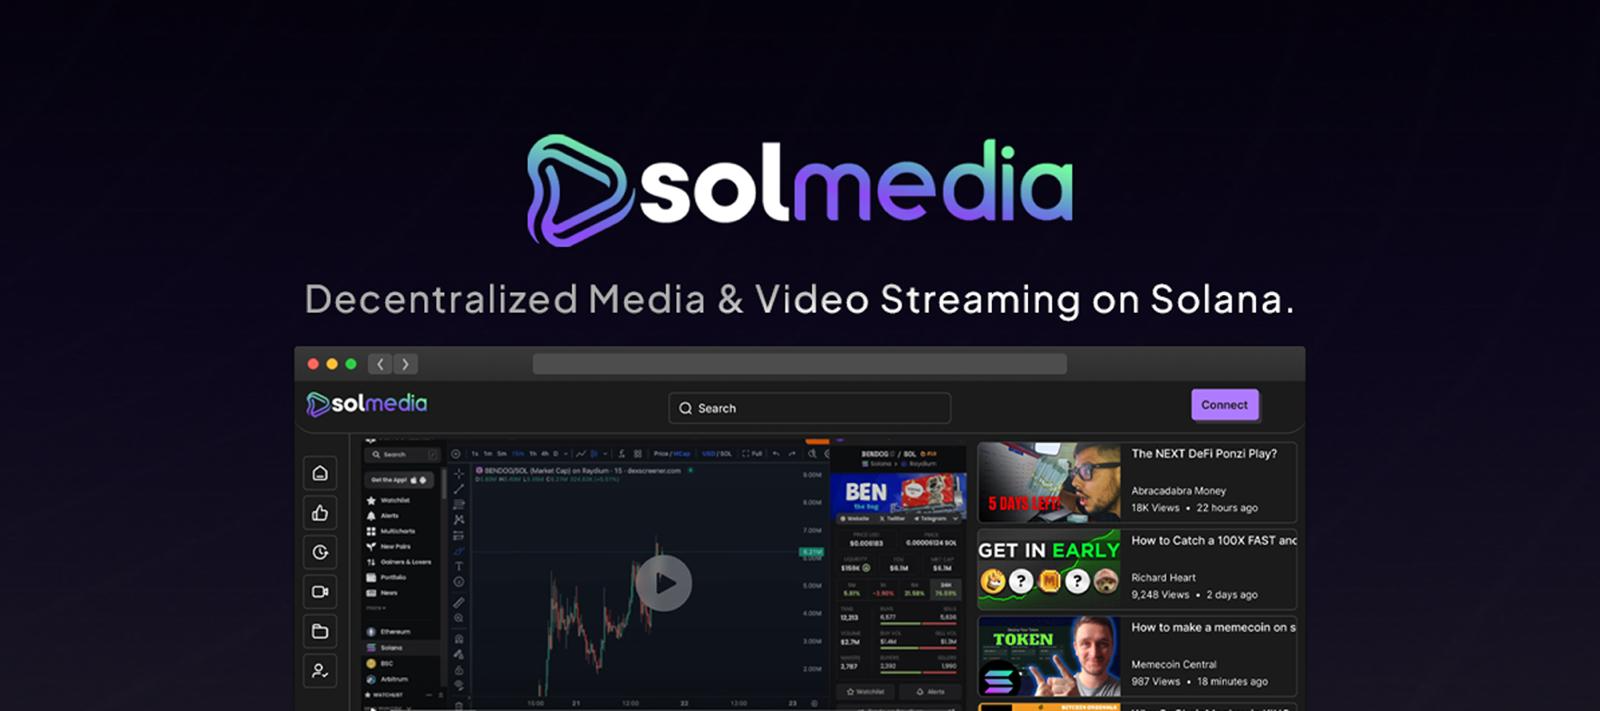 , Solmedia Becomes First To Integrate Solana And Filecoin On Their Censorship-Resistant Platform